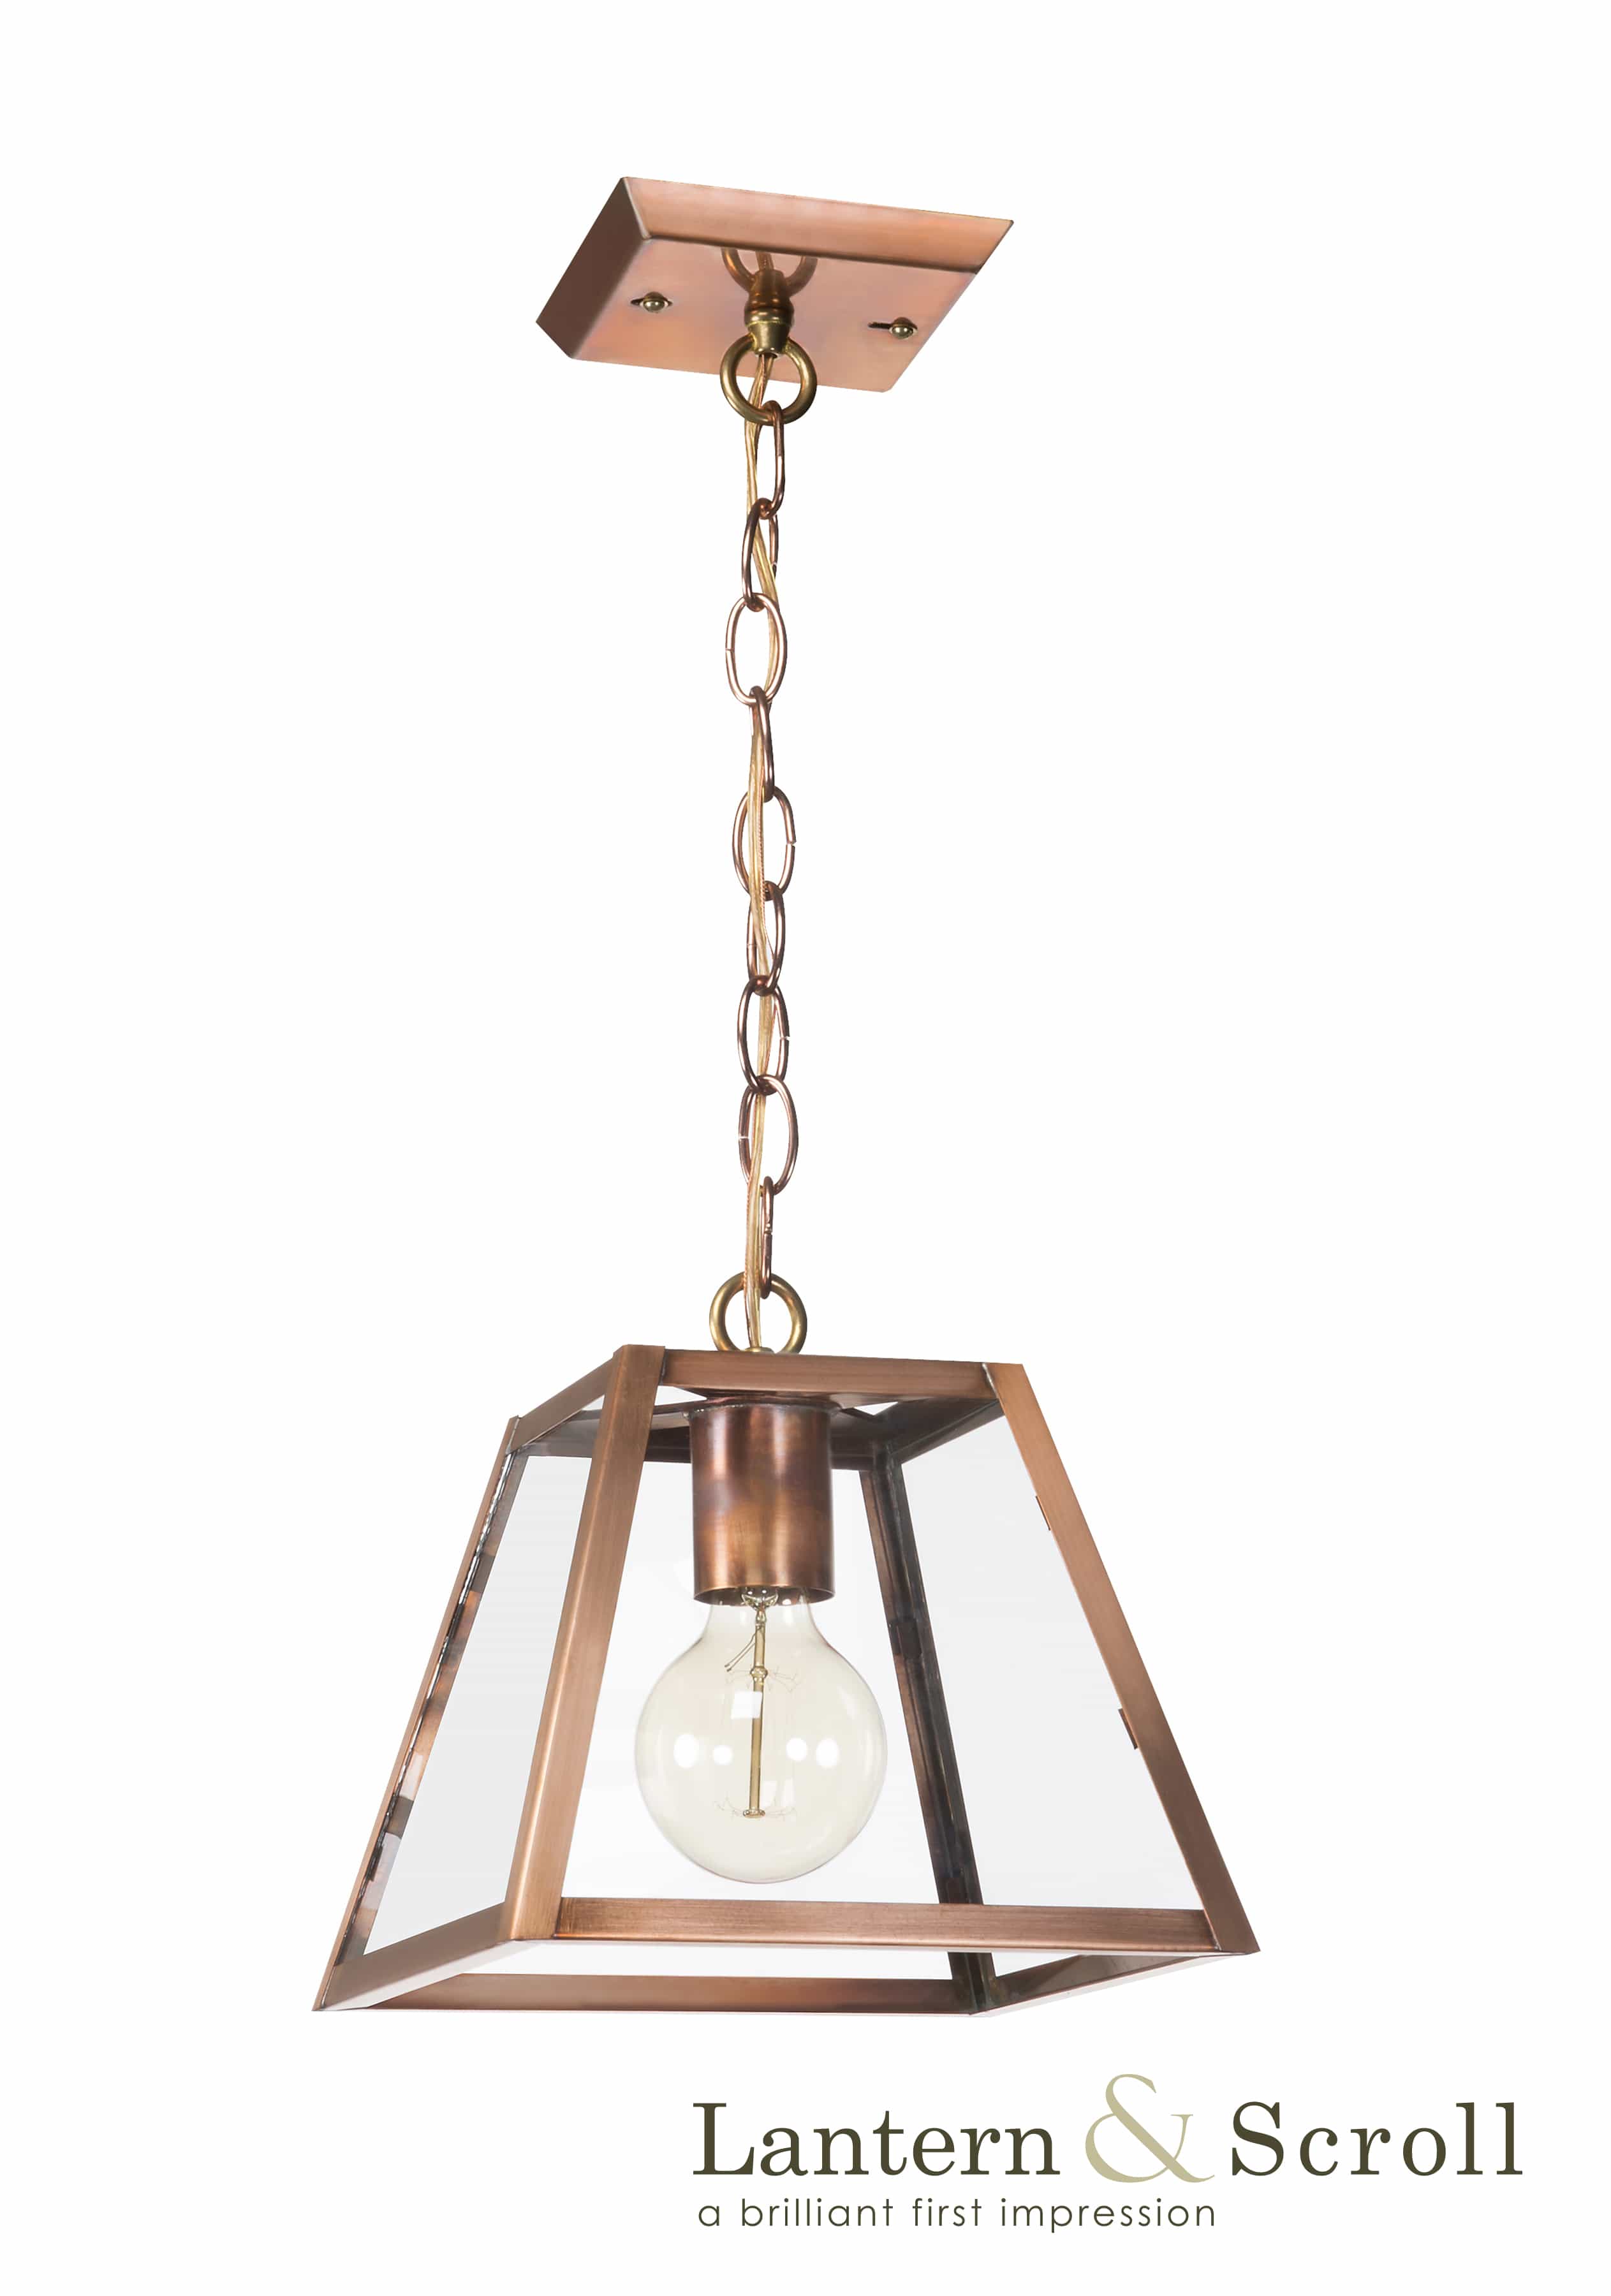 hanging ceiling light lantern bronze copper chain brass exterior interior electric gas scroll -